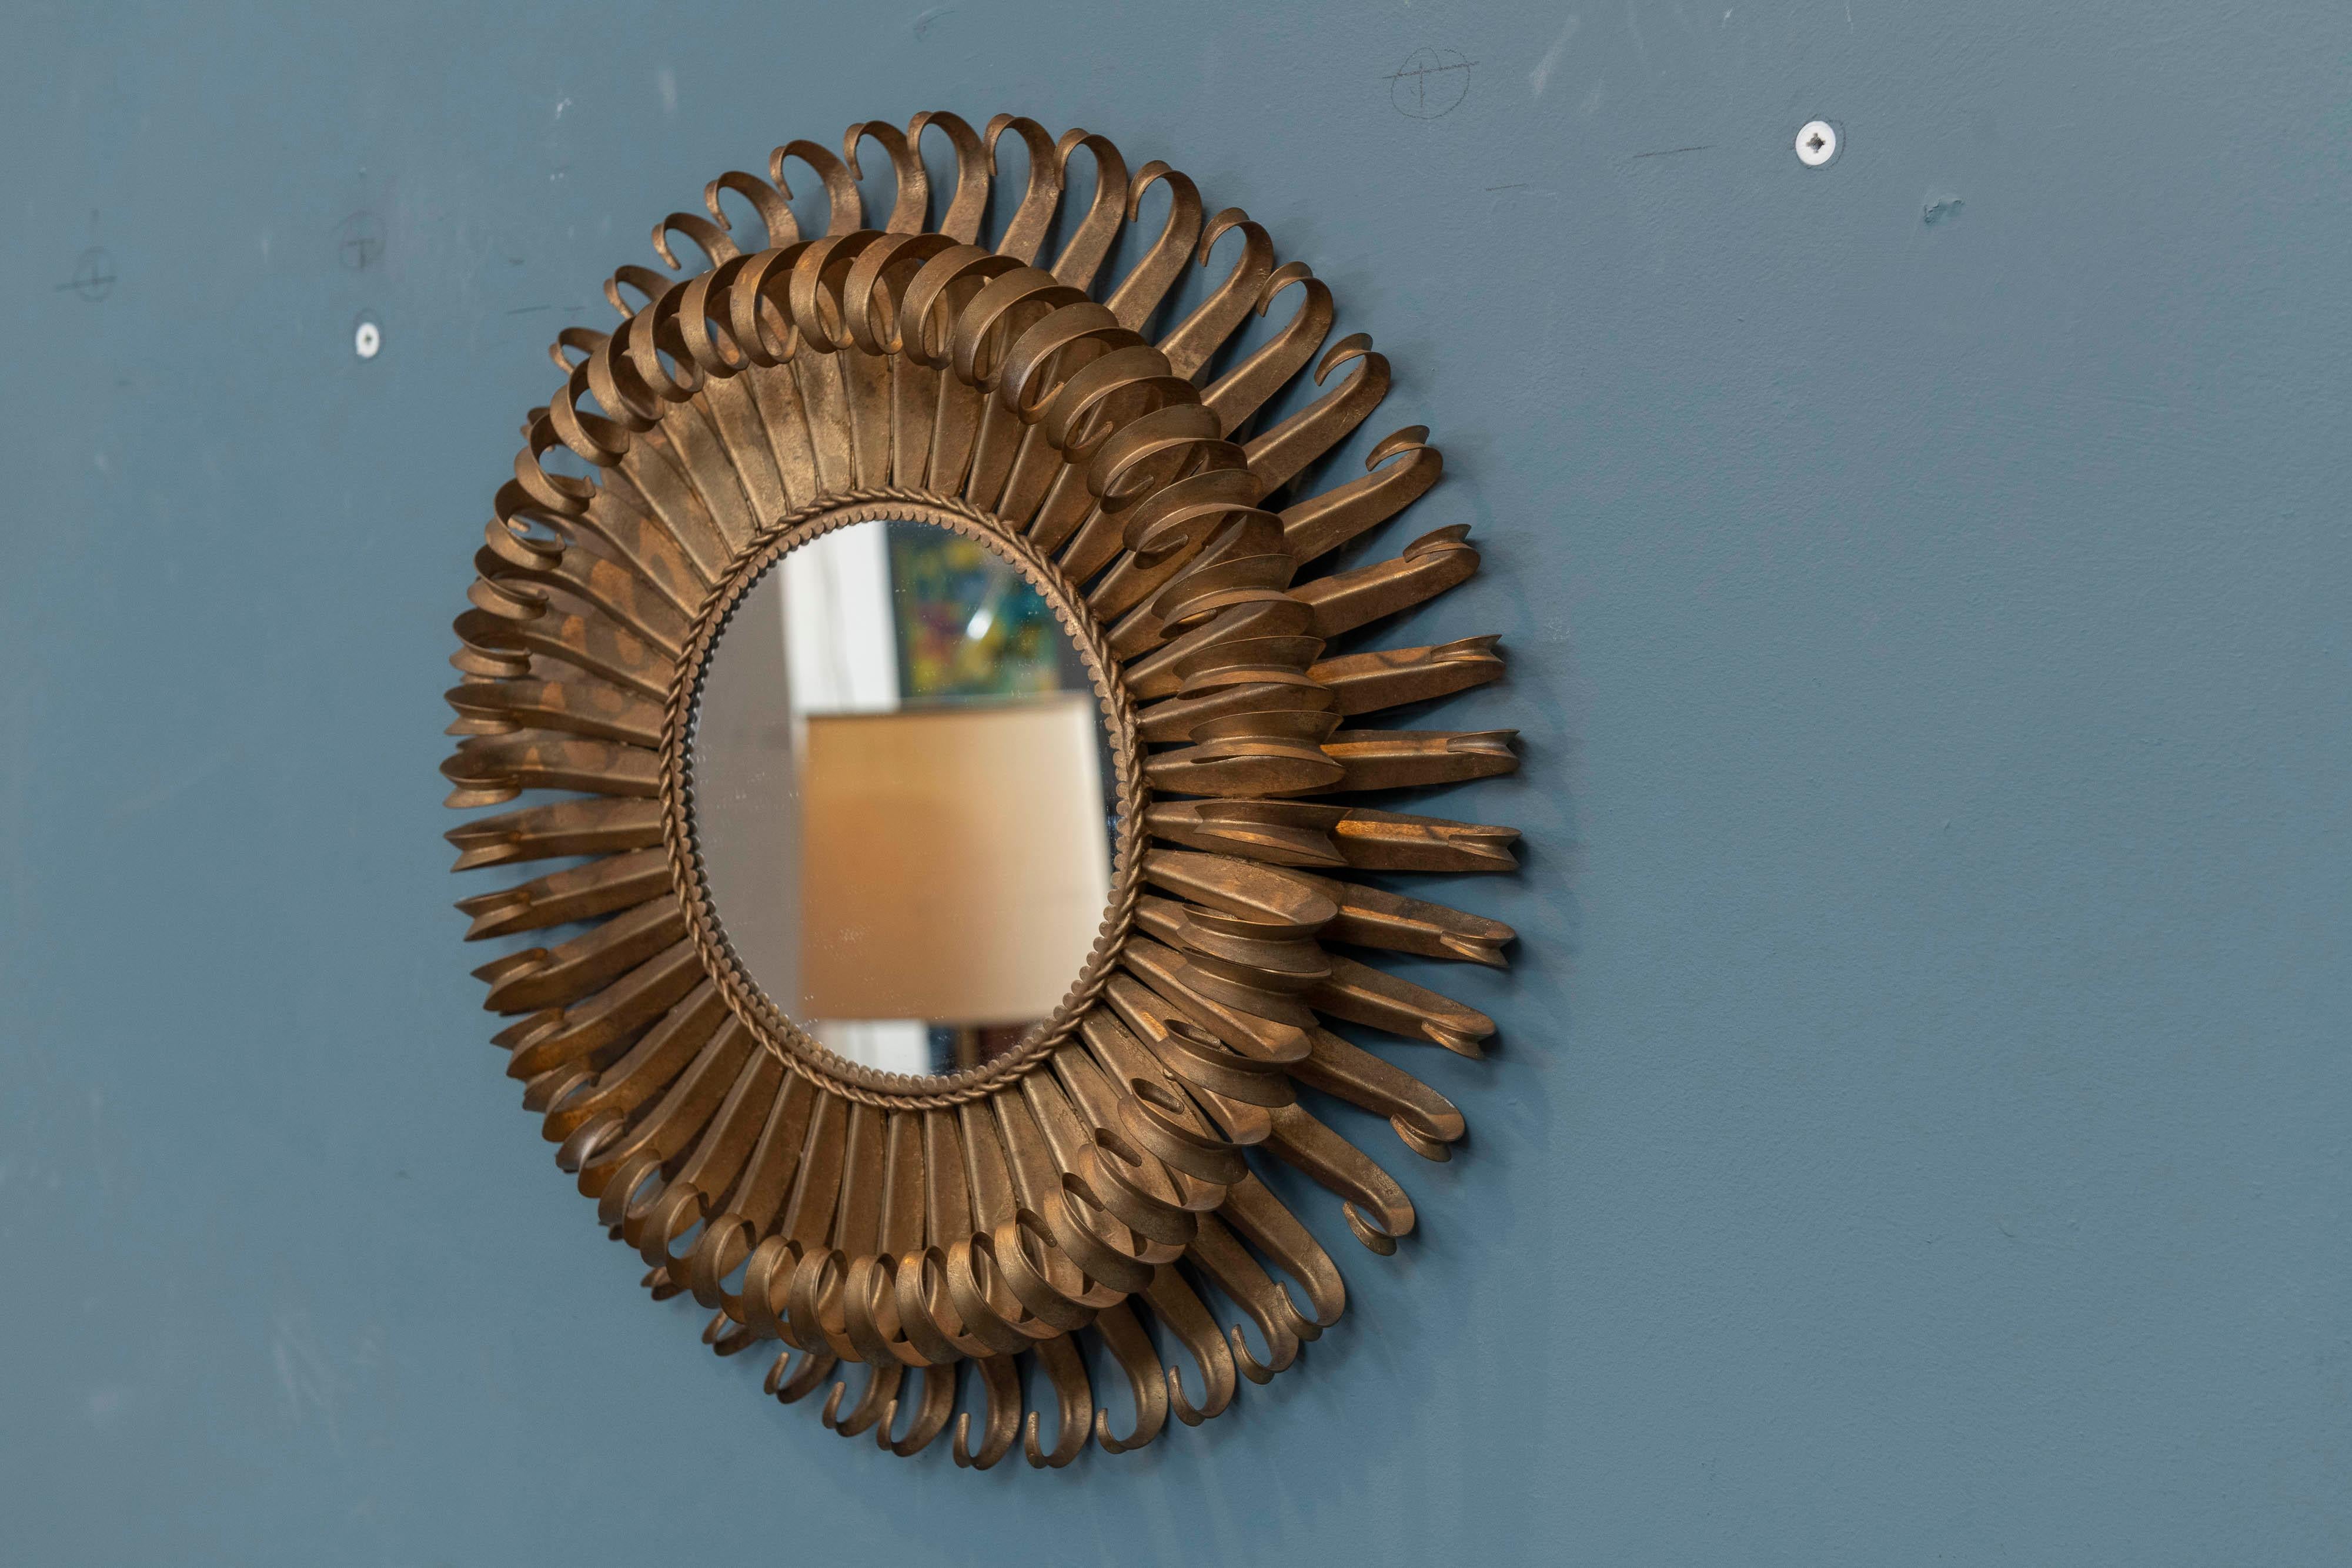 Hollywood Regency gilt-metal eyelash wall mirror, great condition and ready to install.